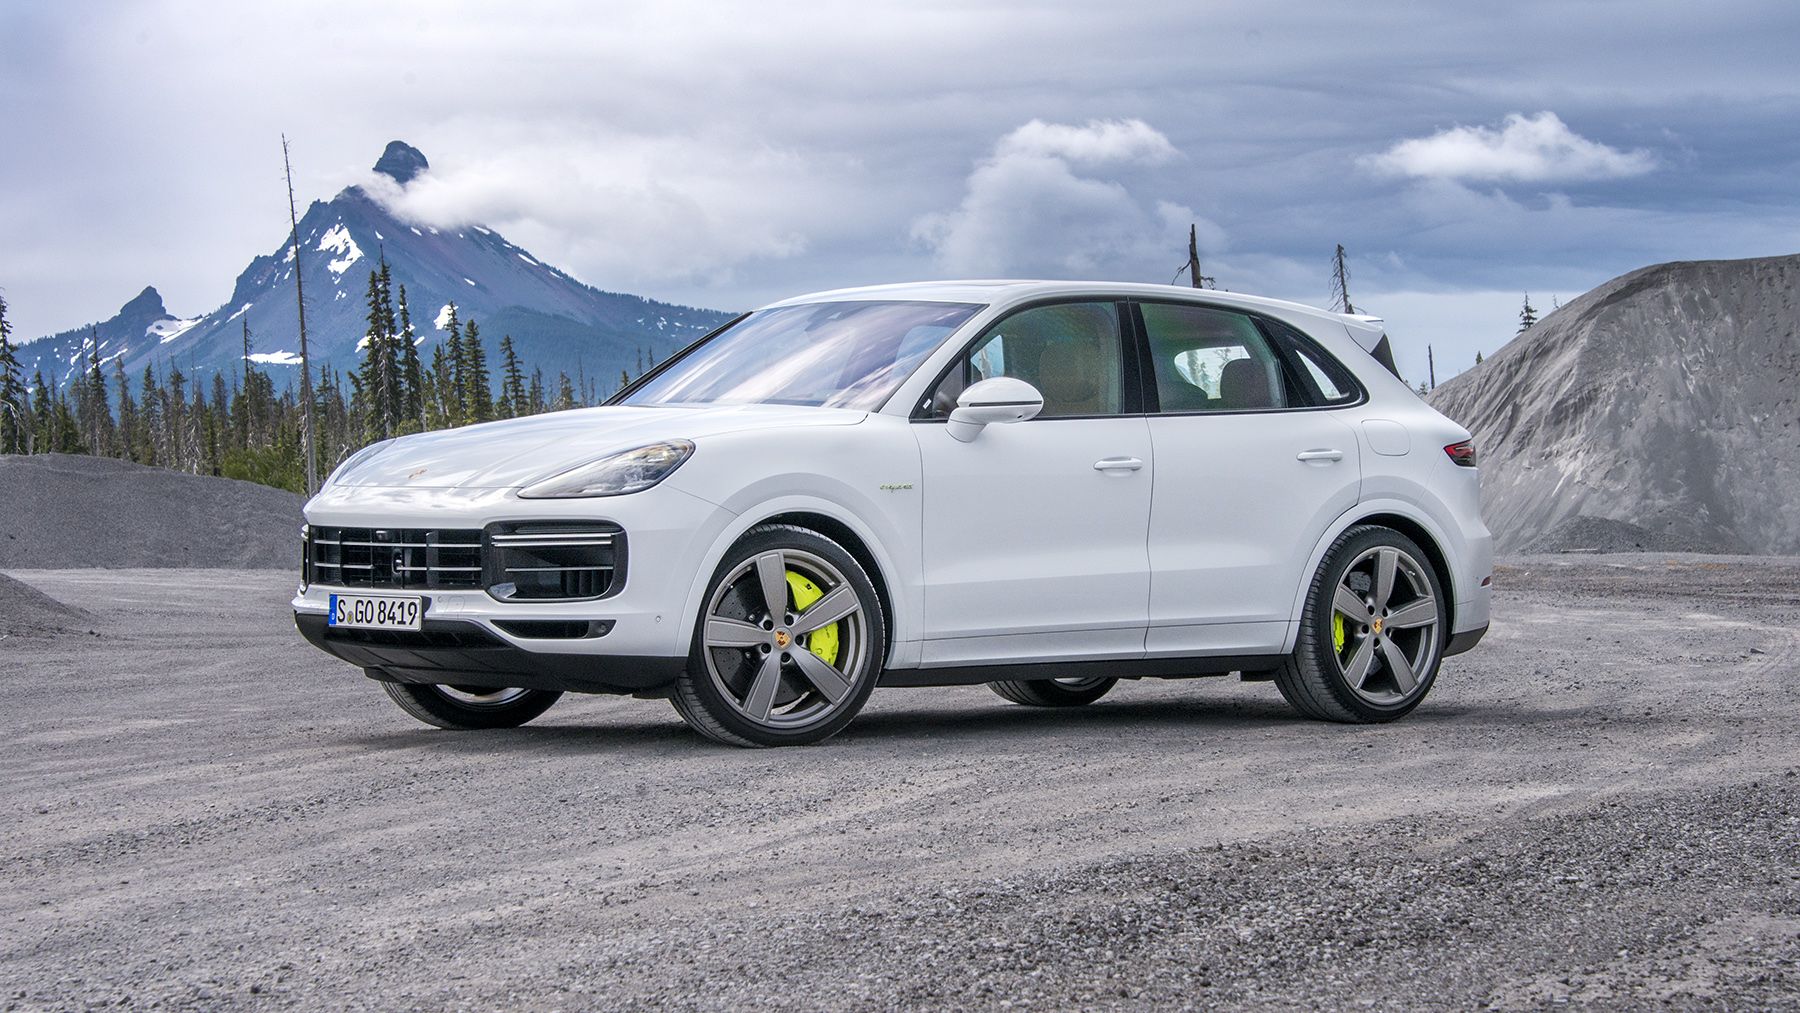 2020 Porsche Cayenne Turbo S E-hybrid review, specs, performance and price